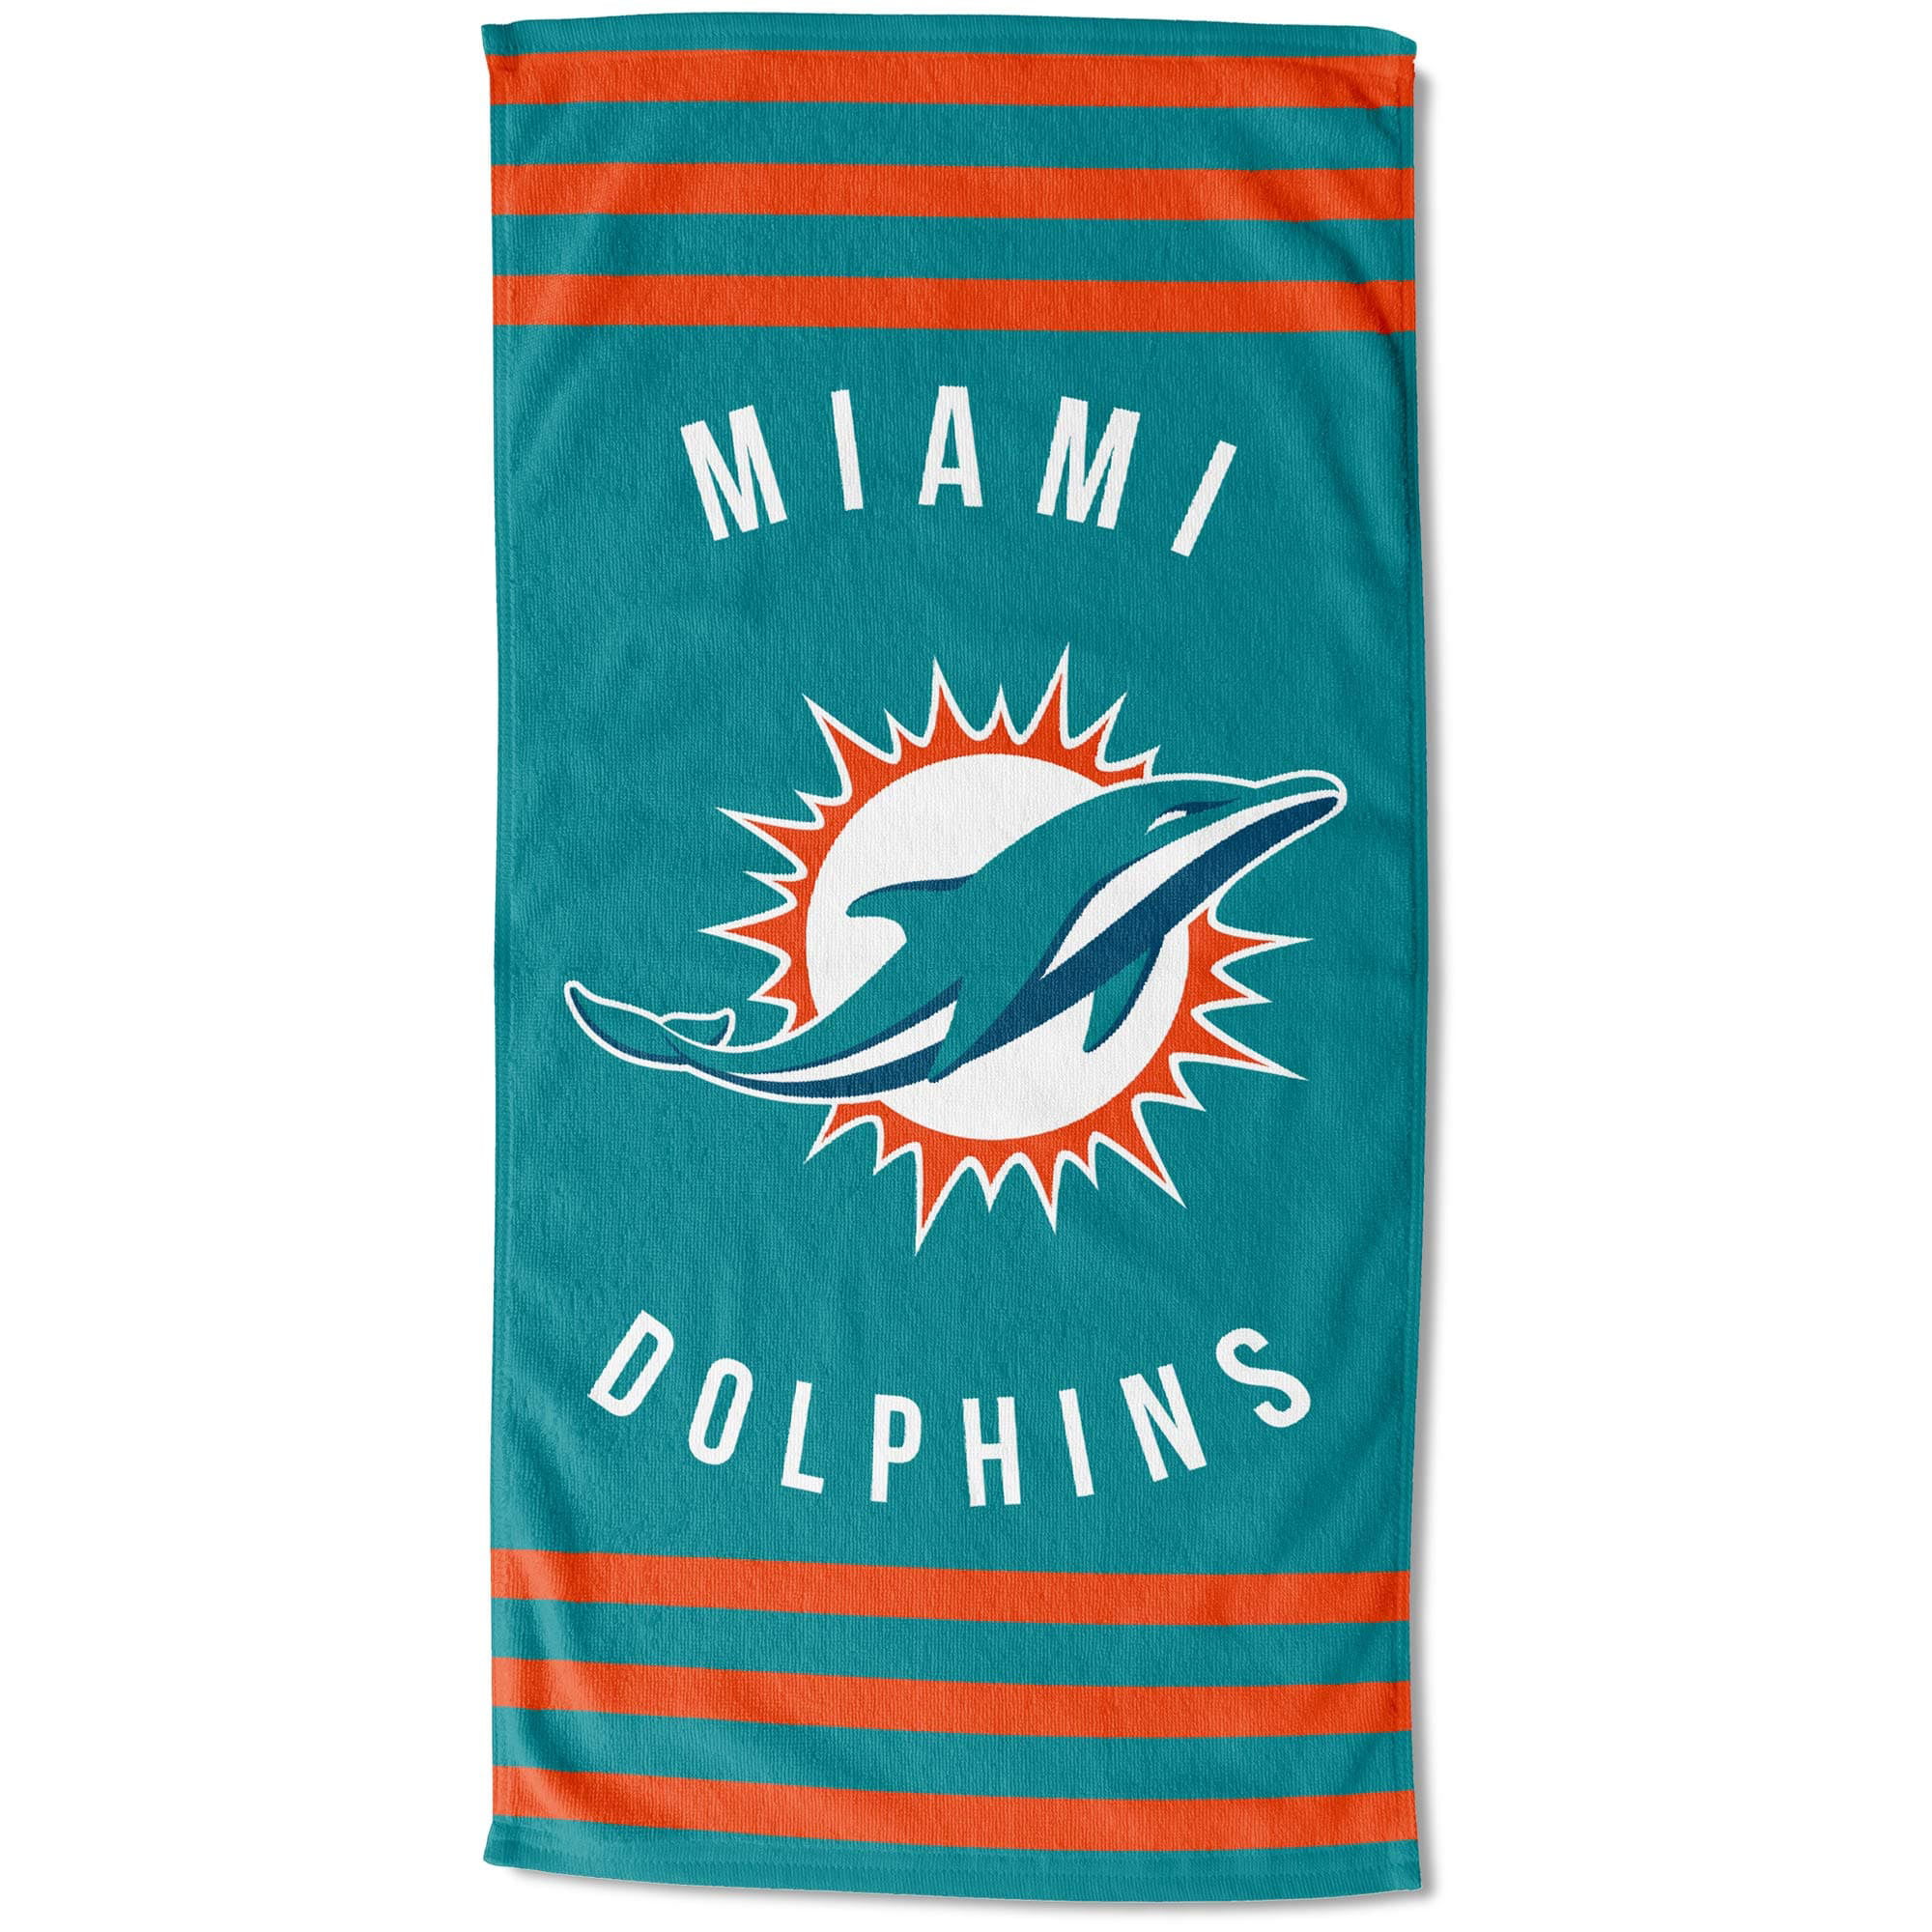 Personalized Football Sports Towel Set Gift Miami Dolphins Football Towel Set 